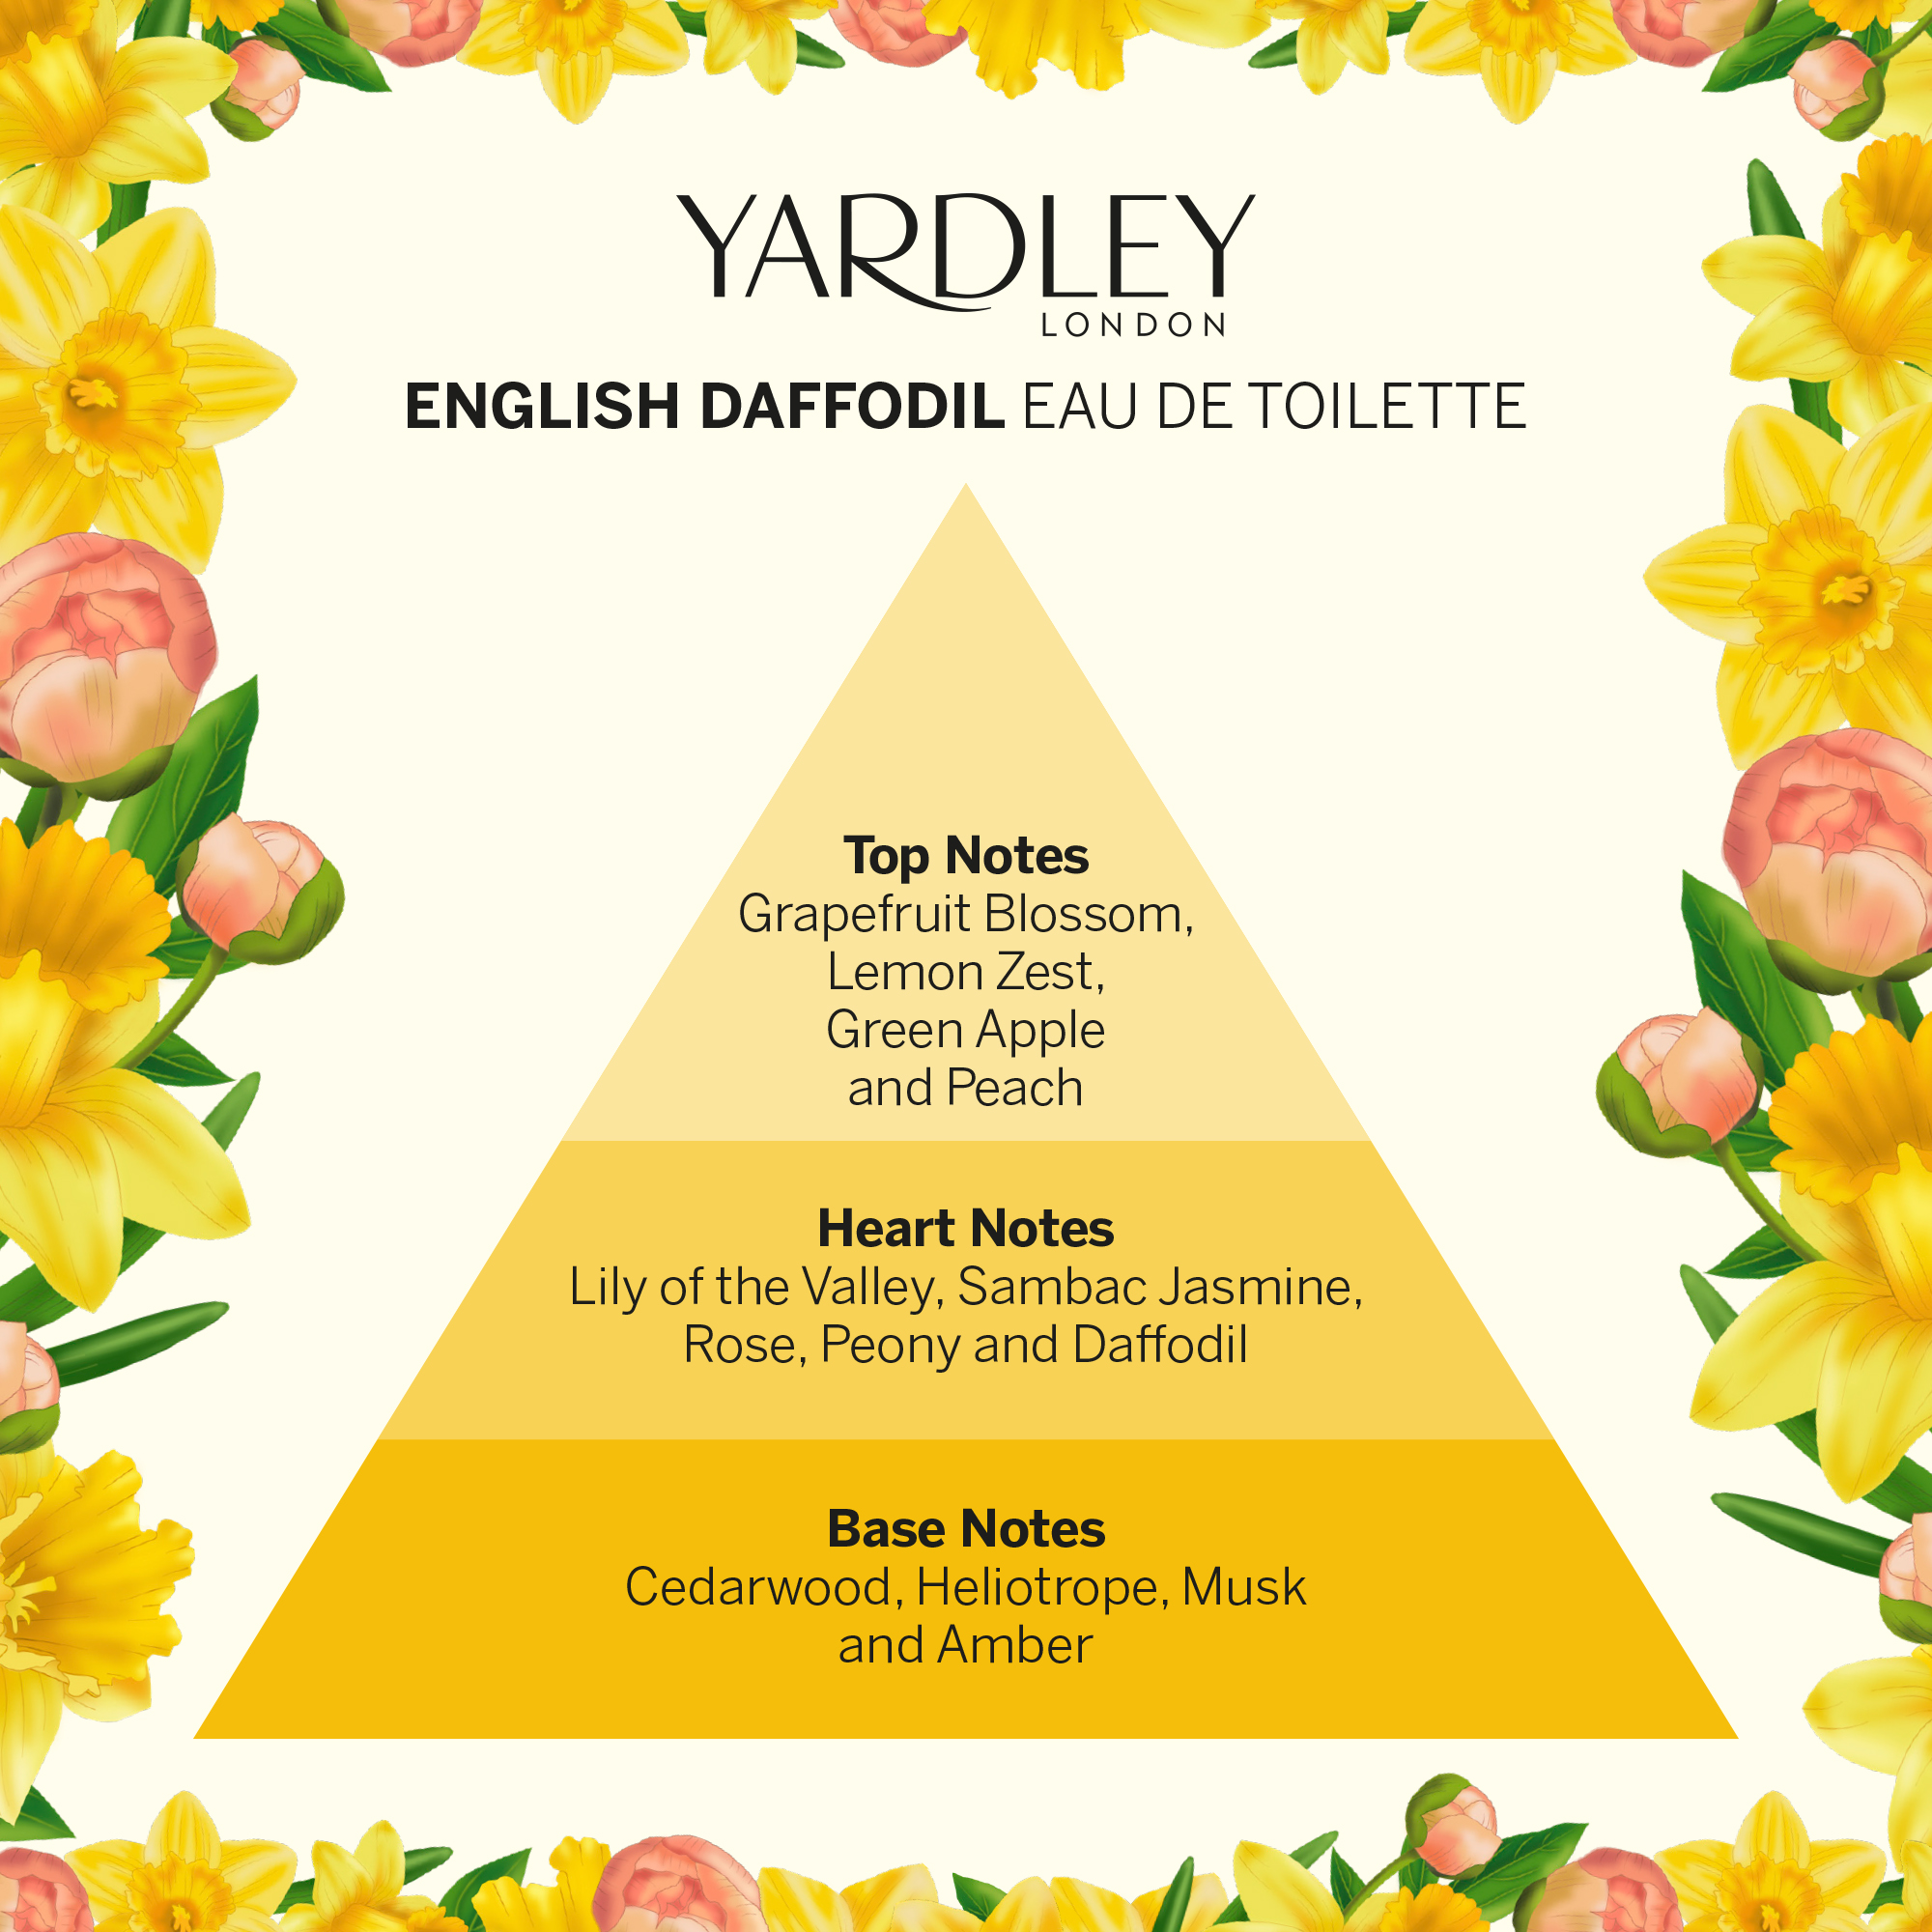 Yardley London. English Daffodil Eau de Toilette. Top Notes, Grapefruit Blossom, Lemon Zest, Green Apple and Peach. Heart Notes, Lily of the Valley, Sambac Jasmine, Rose, Peony and Daffodil. Base Notes, Cedarwood, Heliotrope, Musk and Amber.